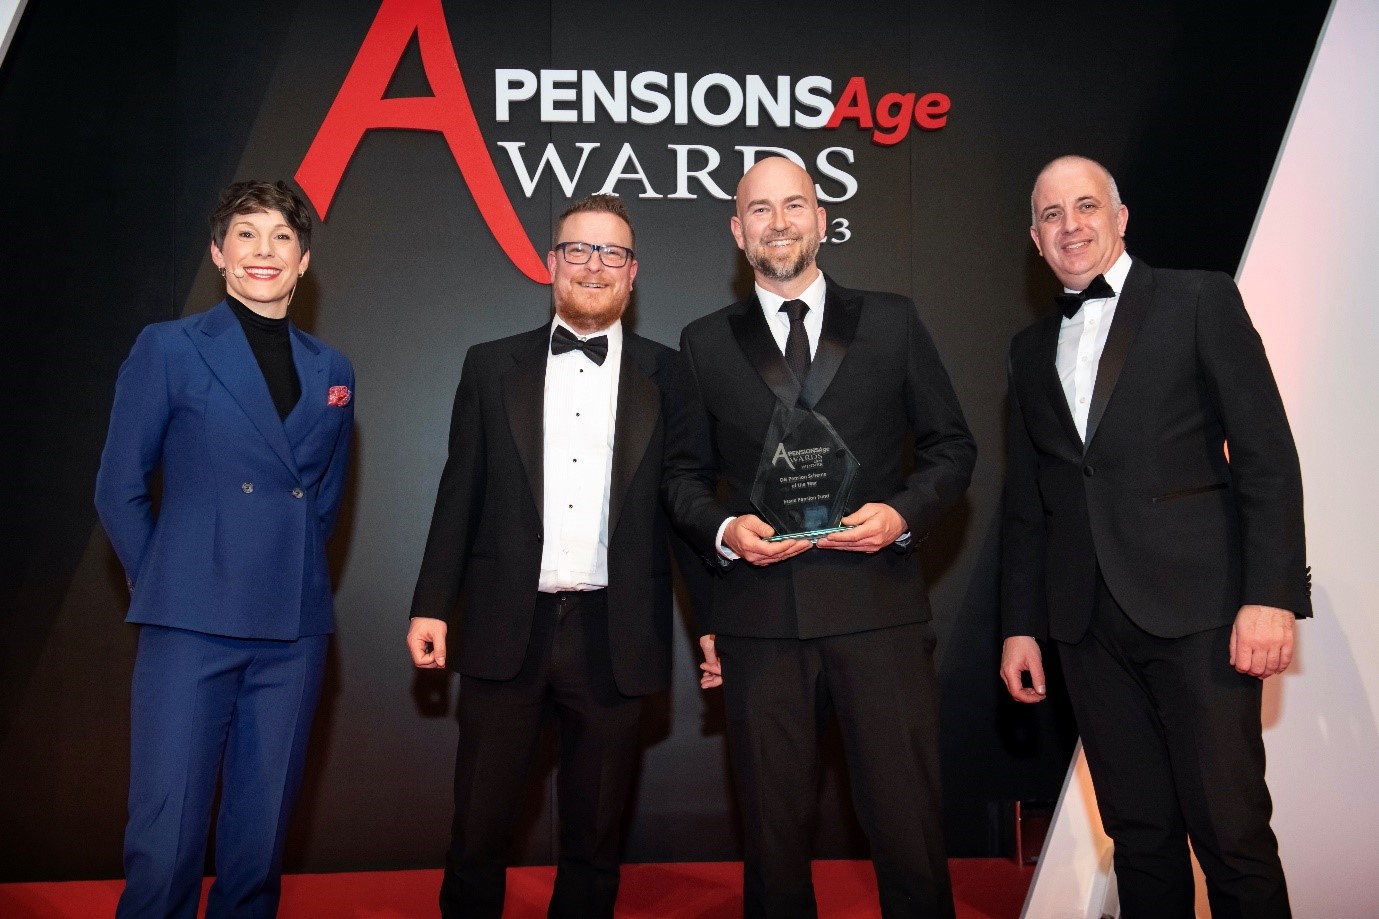 Award wins for Essex Pension Fund – Rewarding careers in Pensions